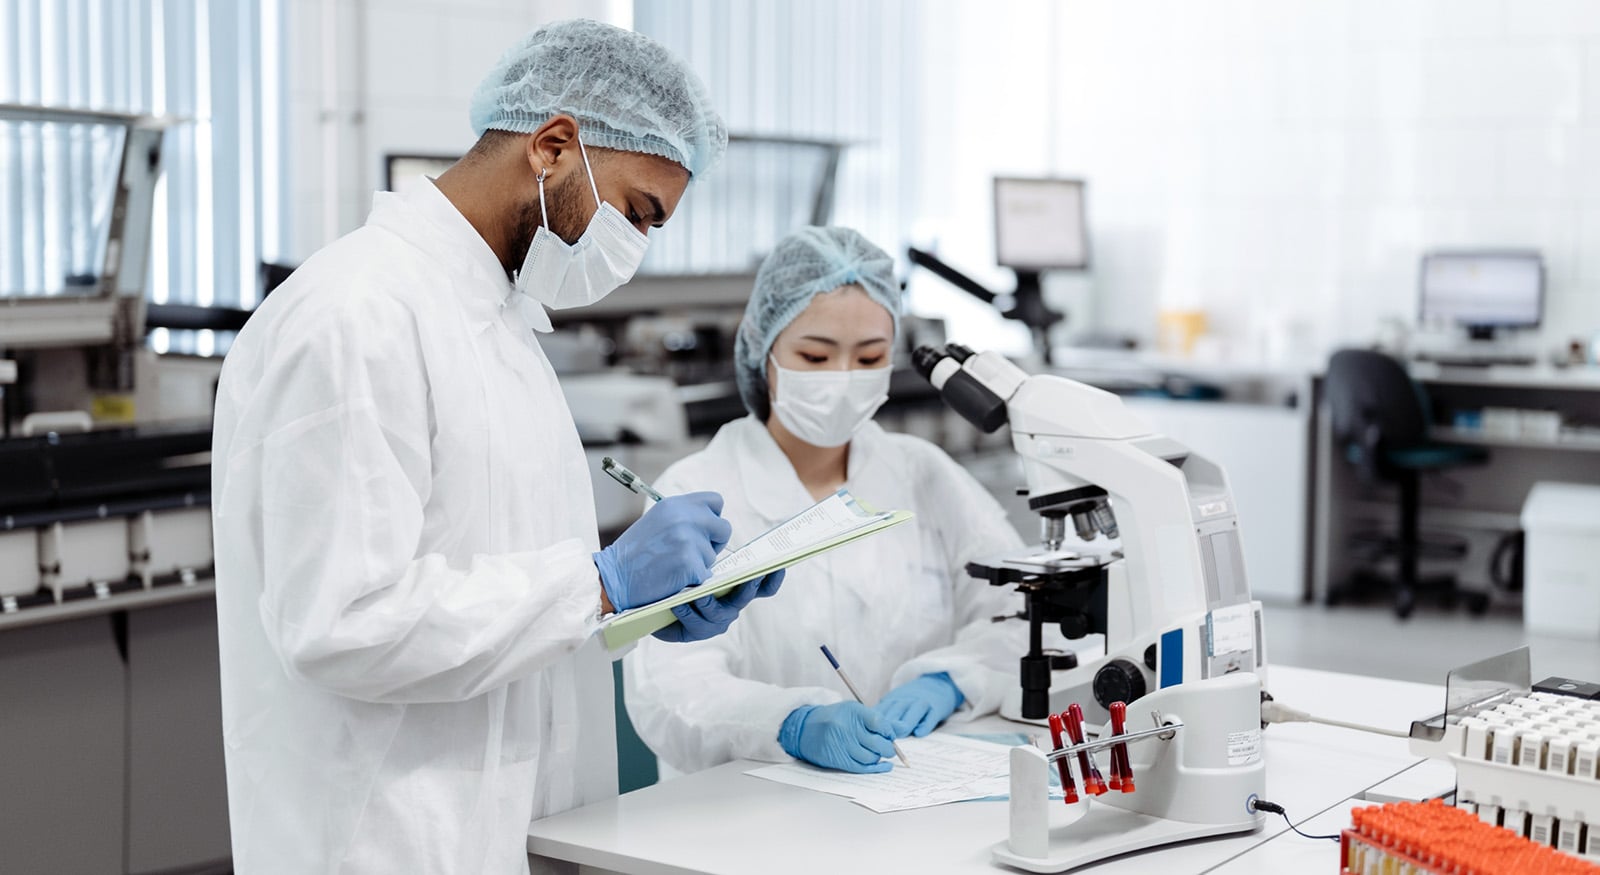 Two people in lab coats working in lab